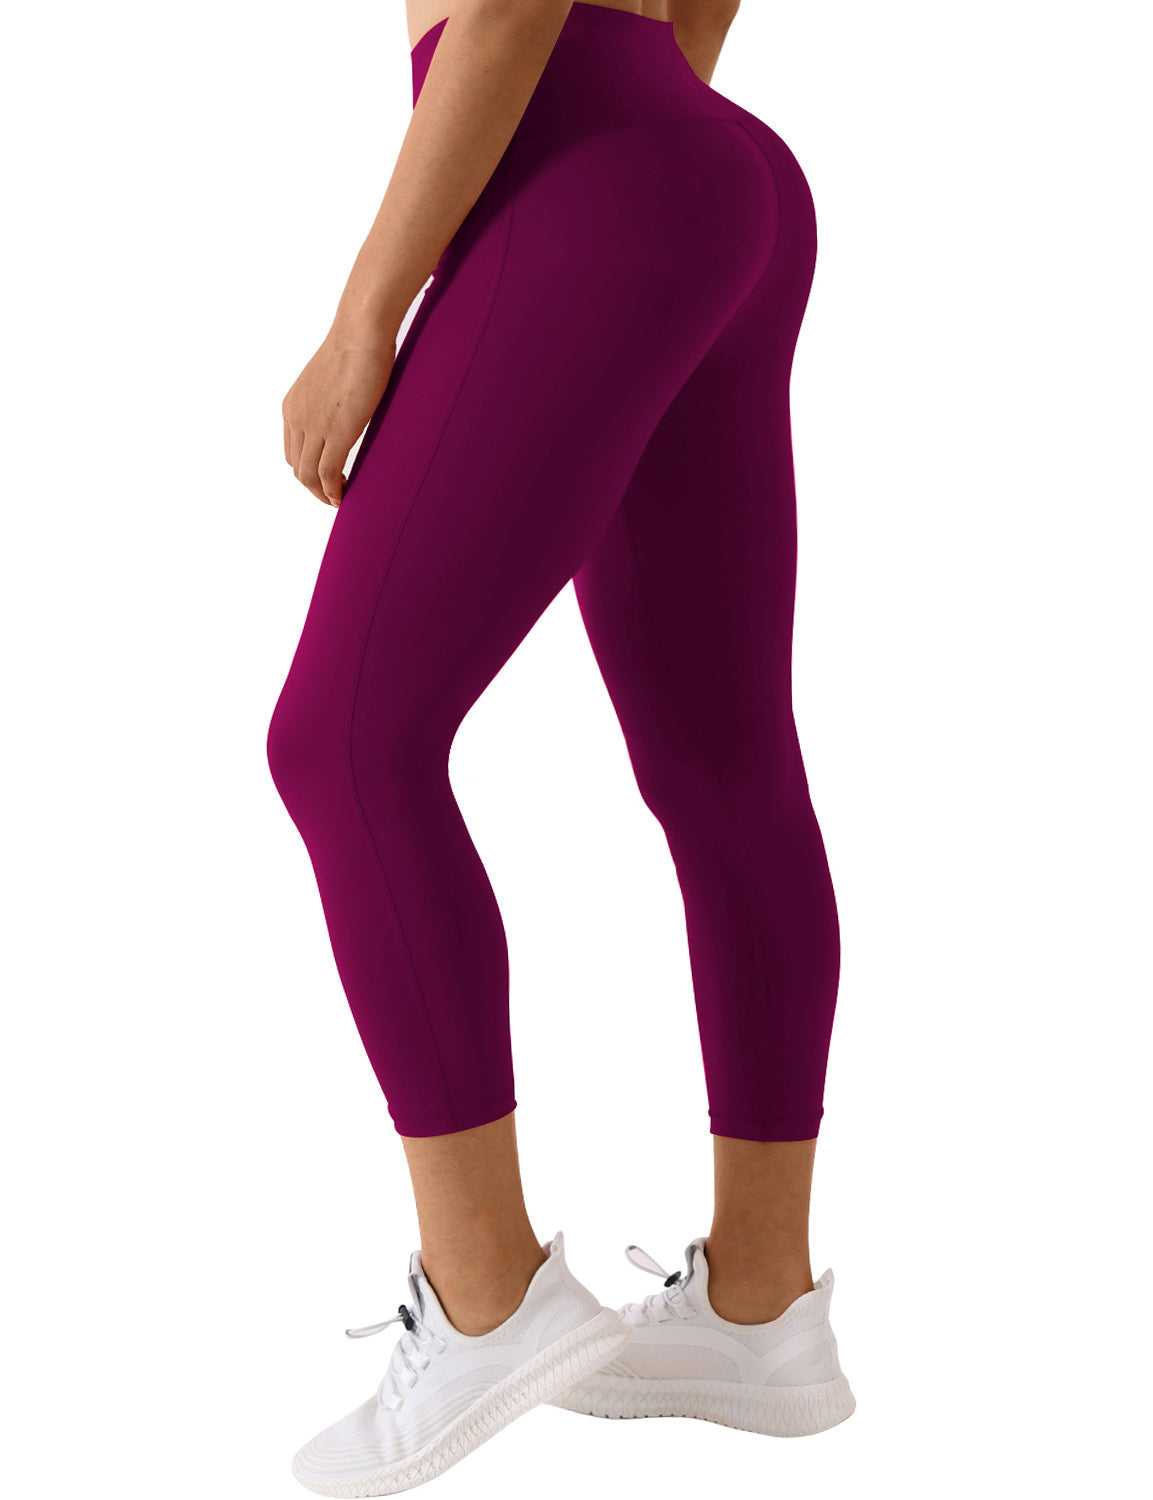 22" High Waist Side Line Capris grapevine 75%Nylon/25%Spandex Fabric doesn't attract lint easily 4-way stretch No see-through Moisture-wicking Tummy control Inner pocket